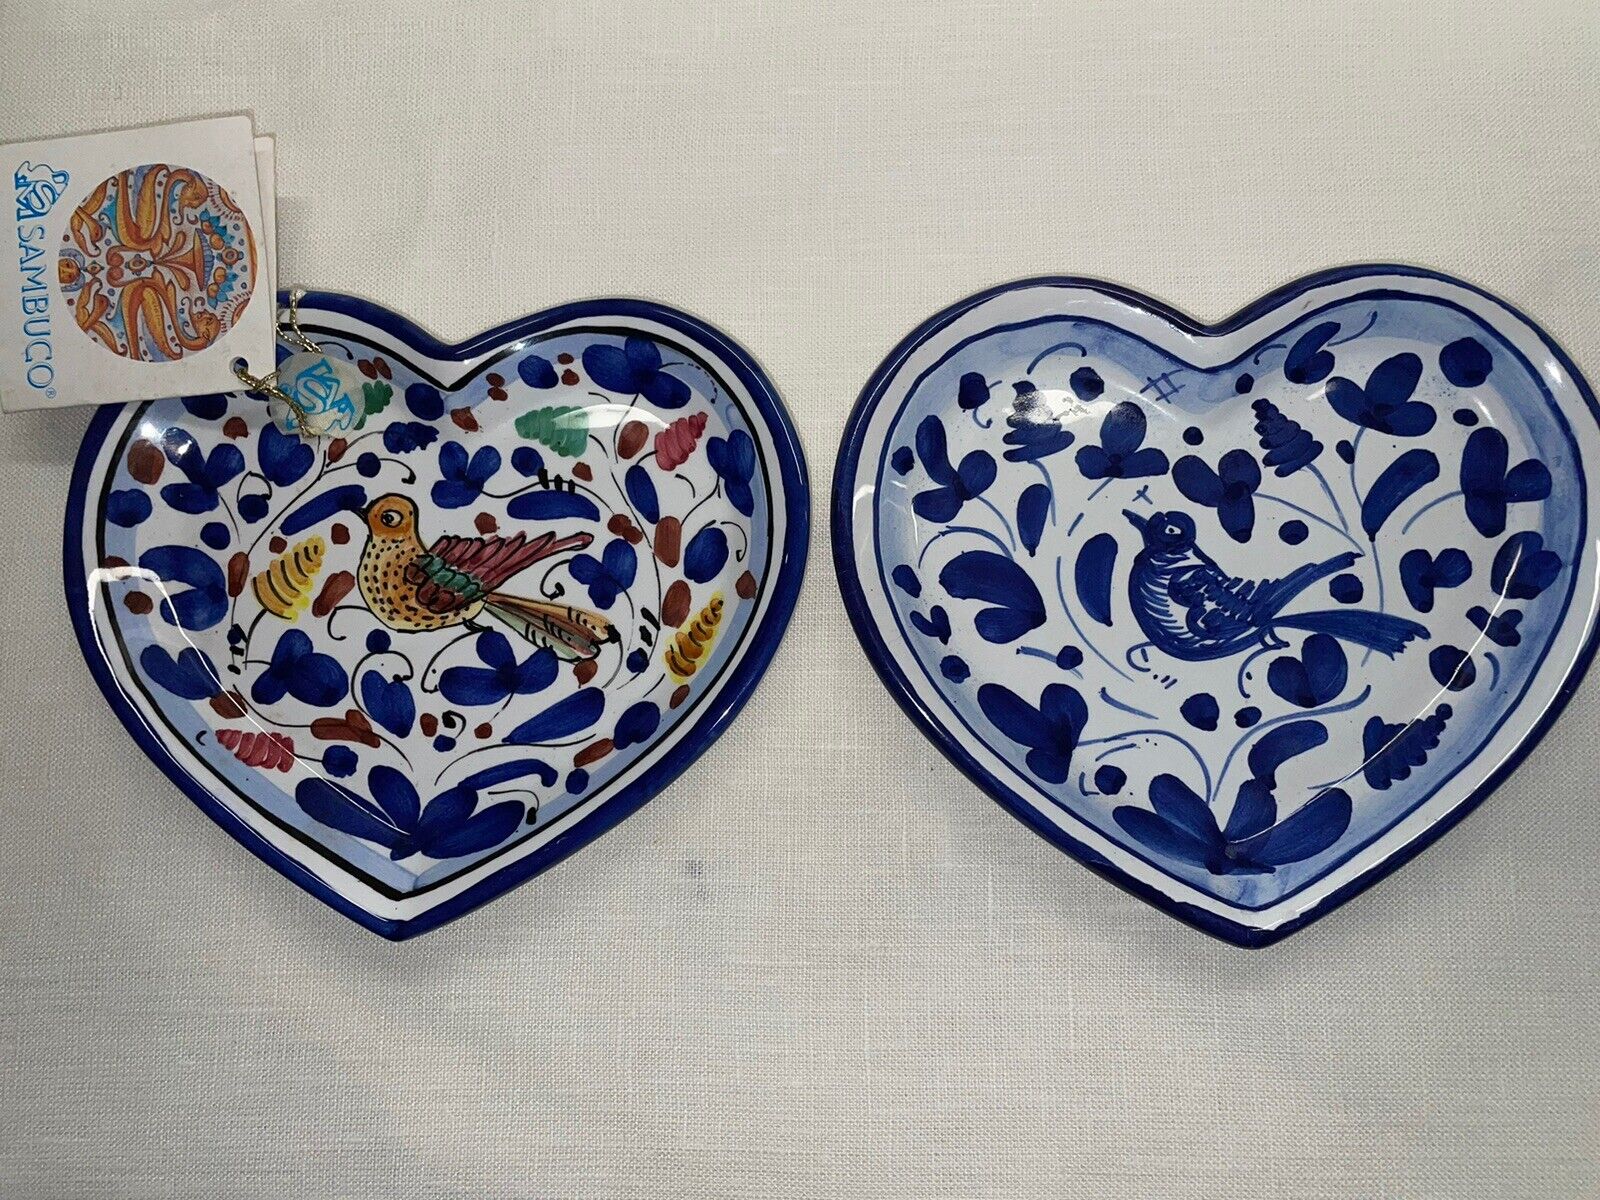 Two 6” Sambuco Heart Shaped, Hand Painted Bird Dishes From Deruto Italy.  Nice